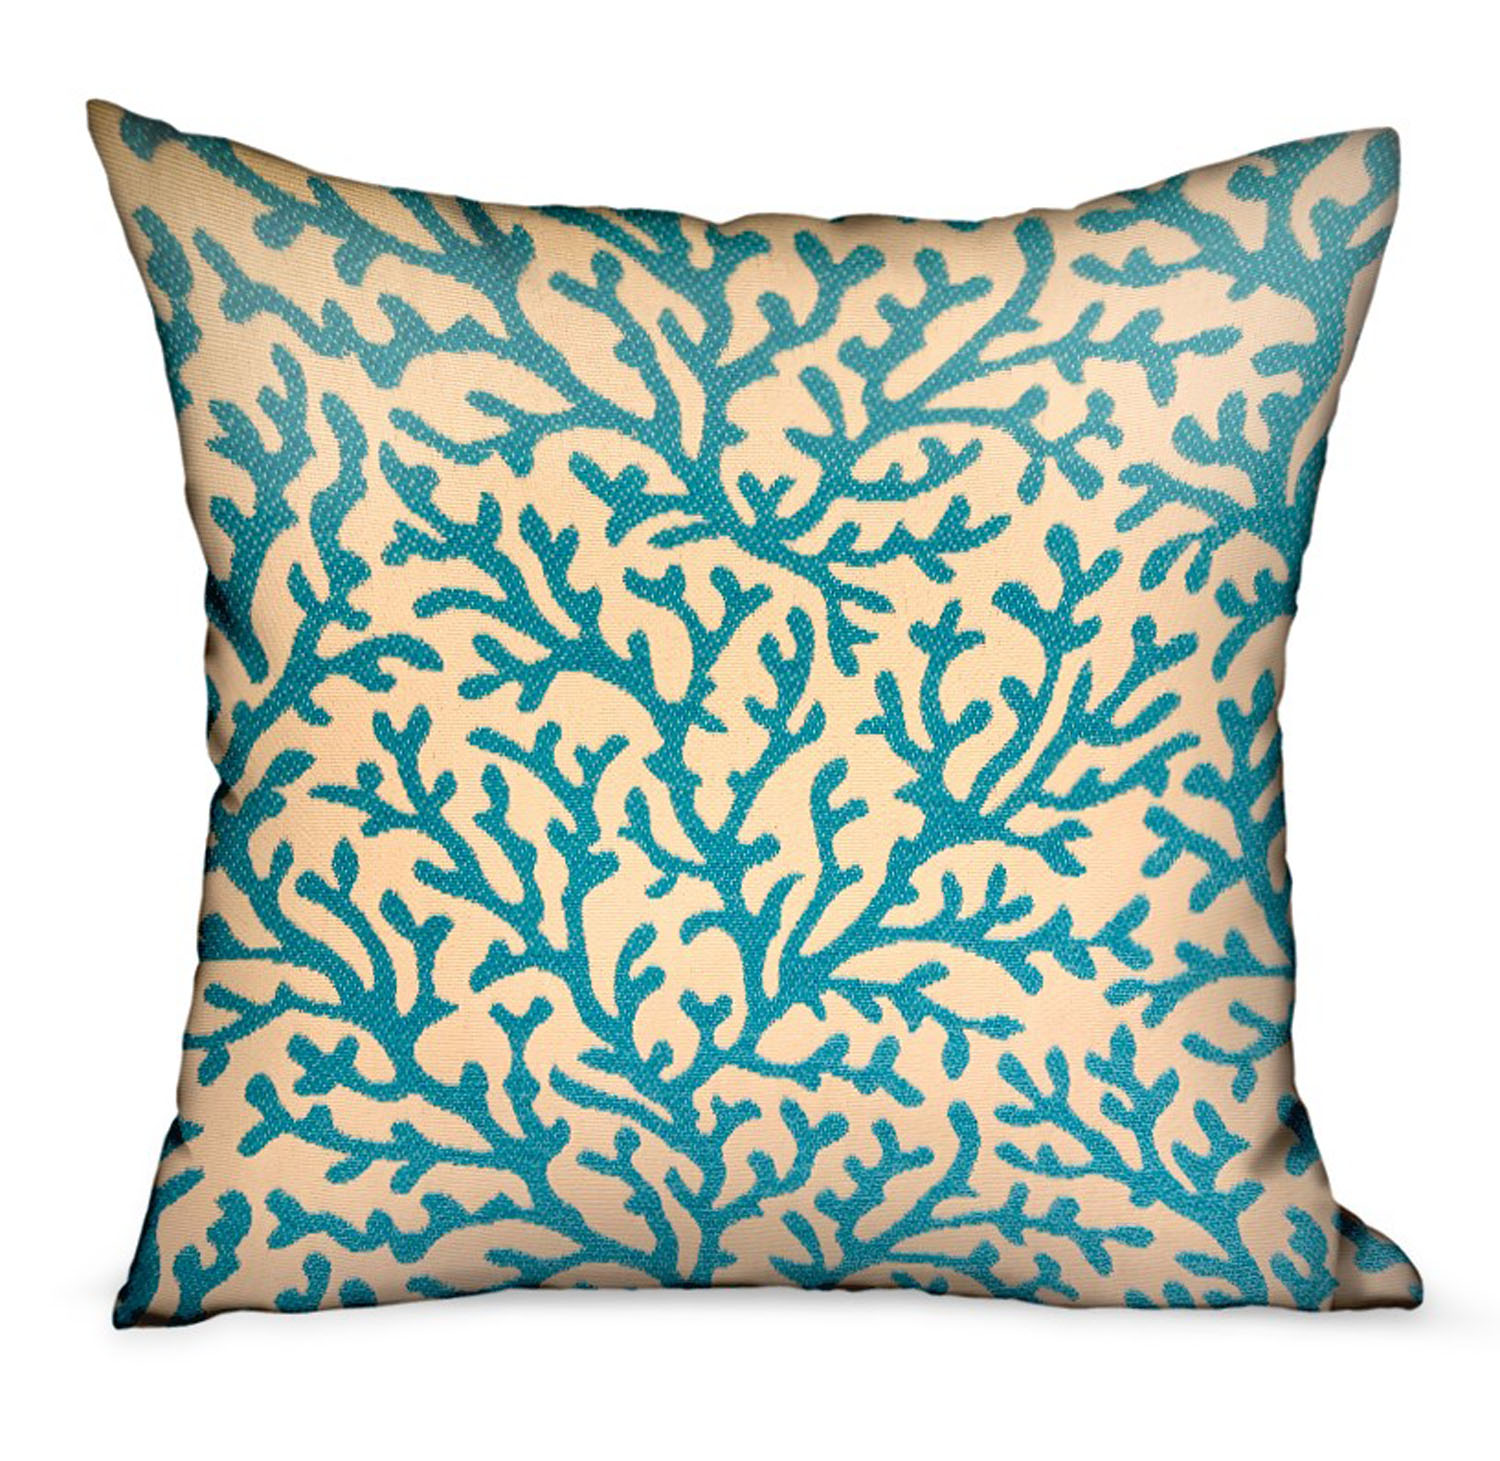 Plutus Brands Marlin Vines Blue, Cream Floral Luxury Throw Pillow Double Sided, 24"x24"